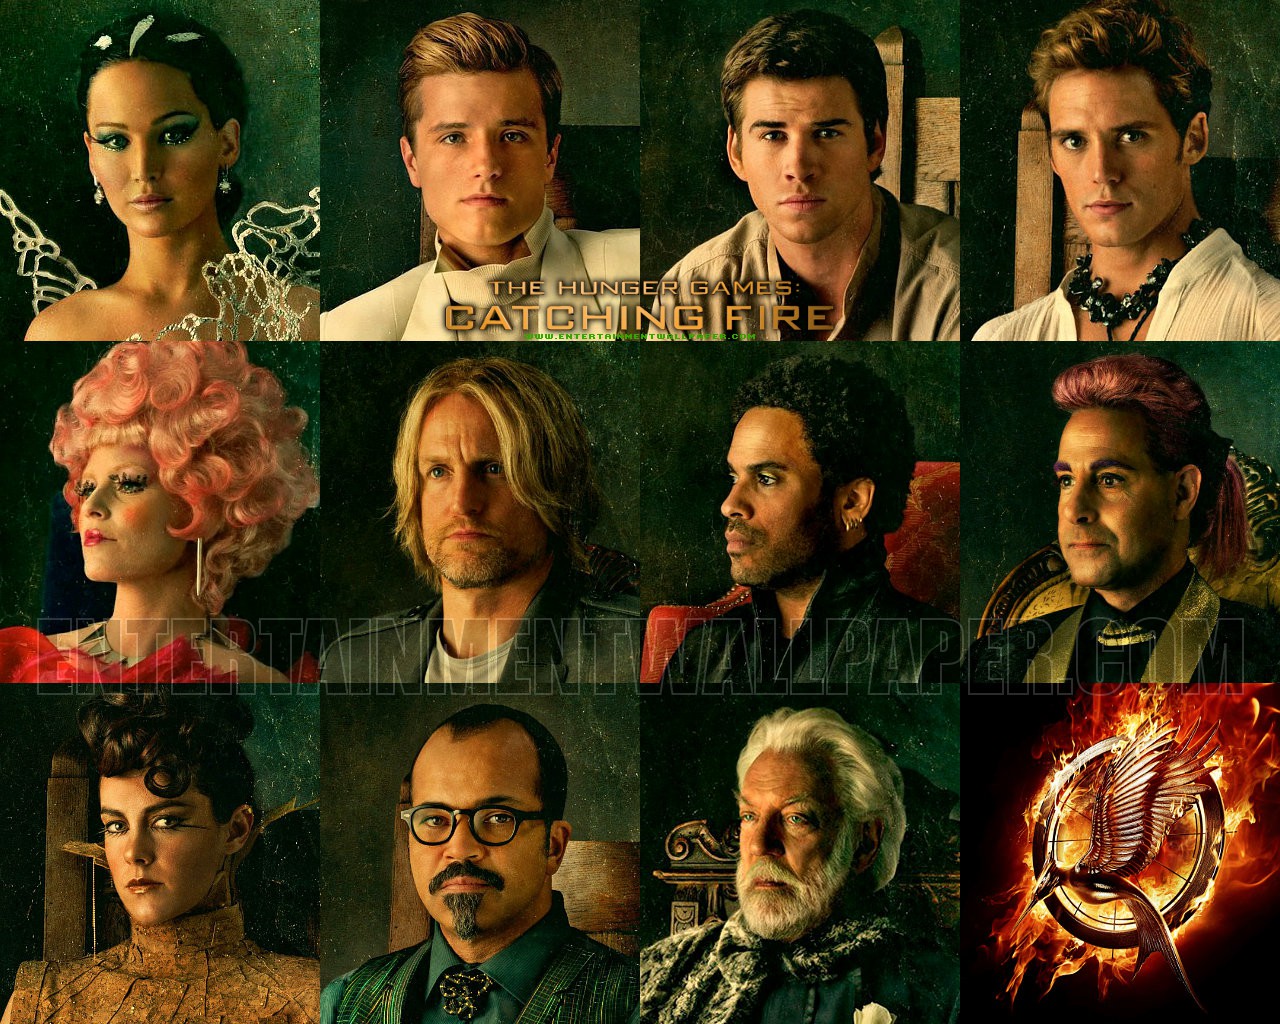 catching fire full movie free online no download or sign up